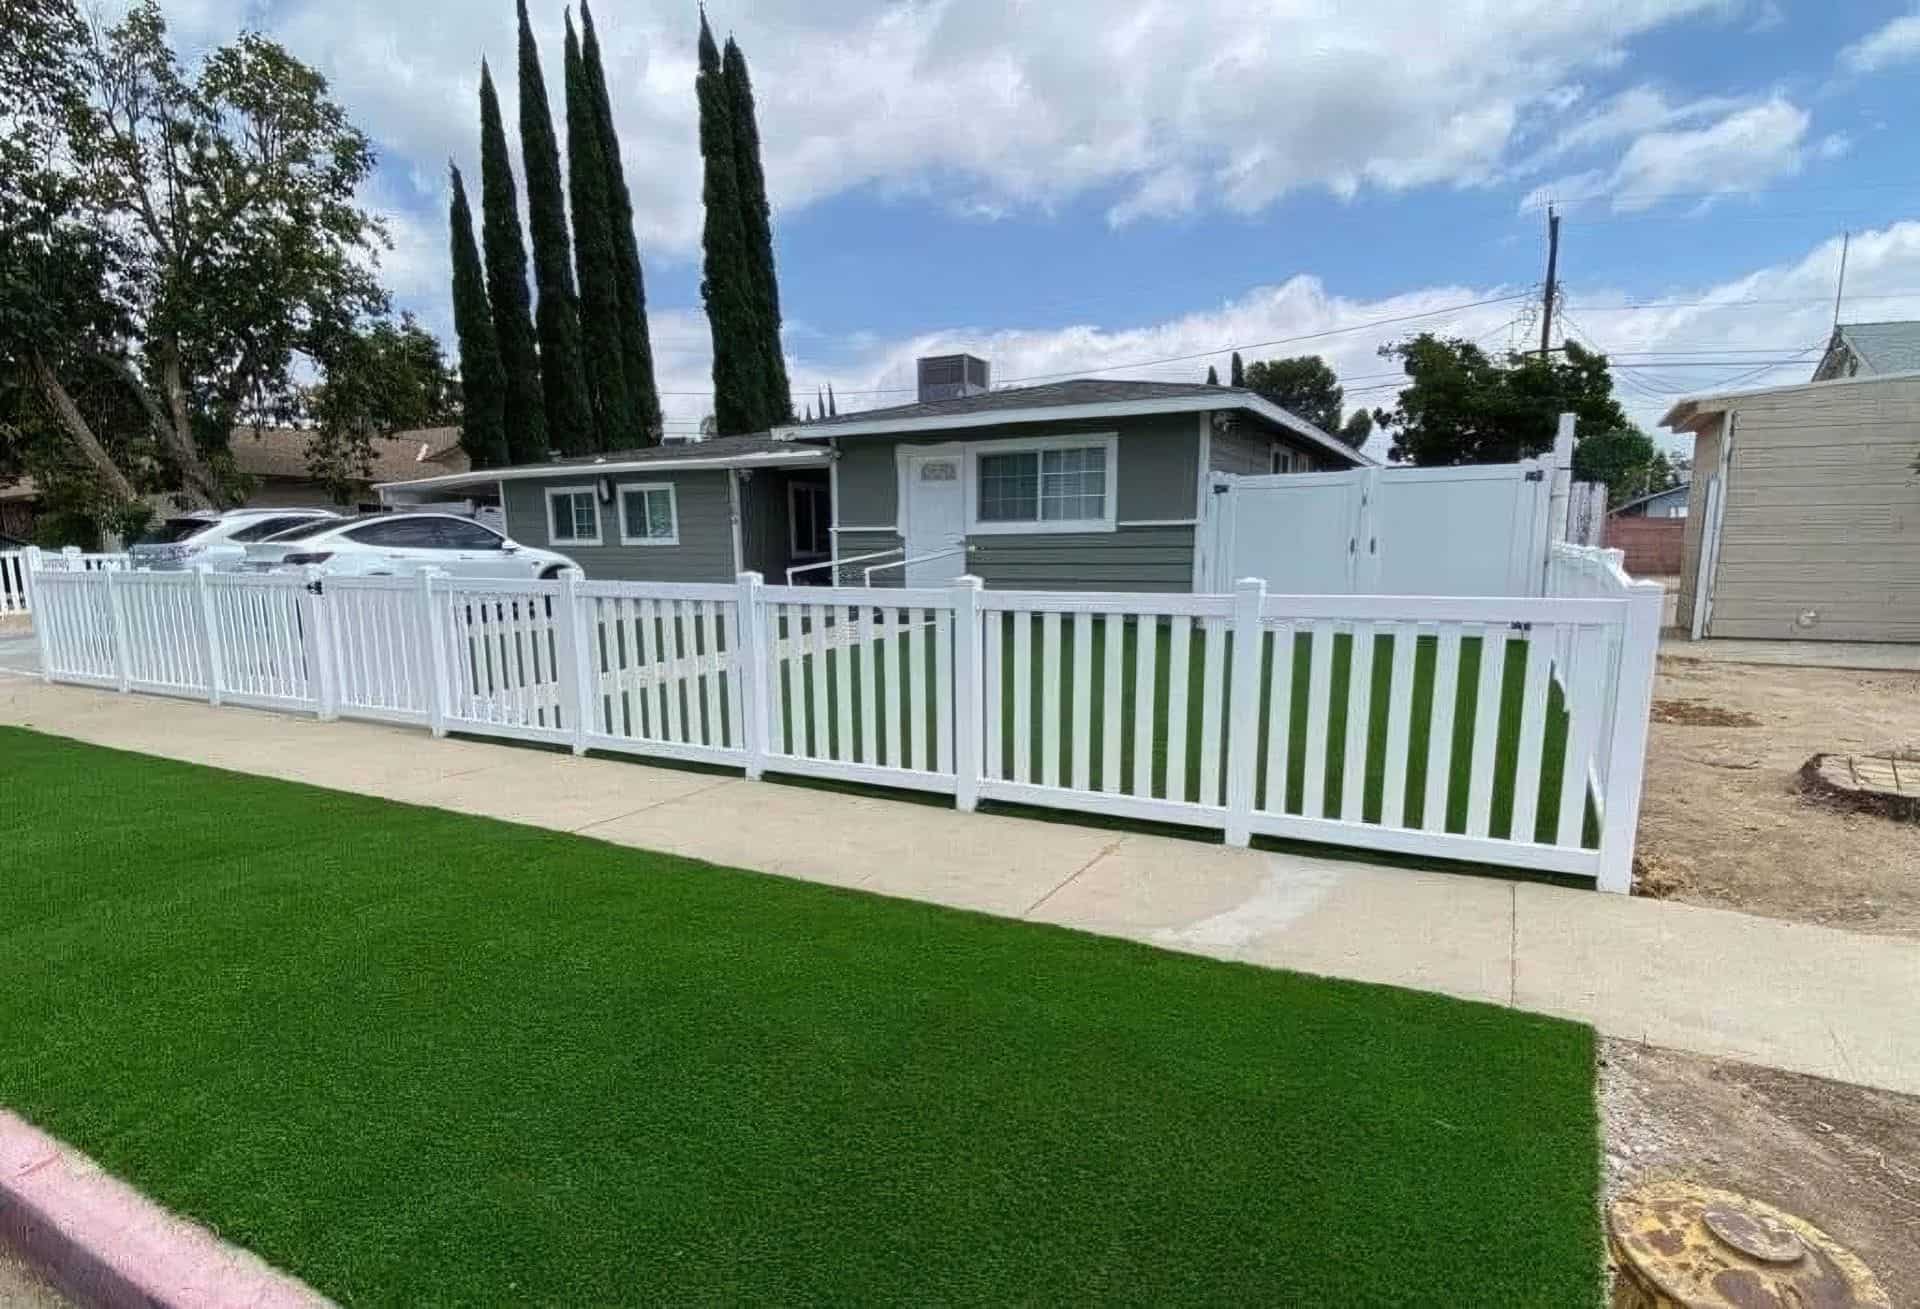 Suburban house surrounded by vinyl closed-top picket fence, lush lawn & trees, with a concrete sidewalk in the foreground.